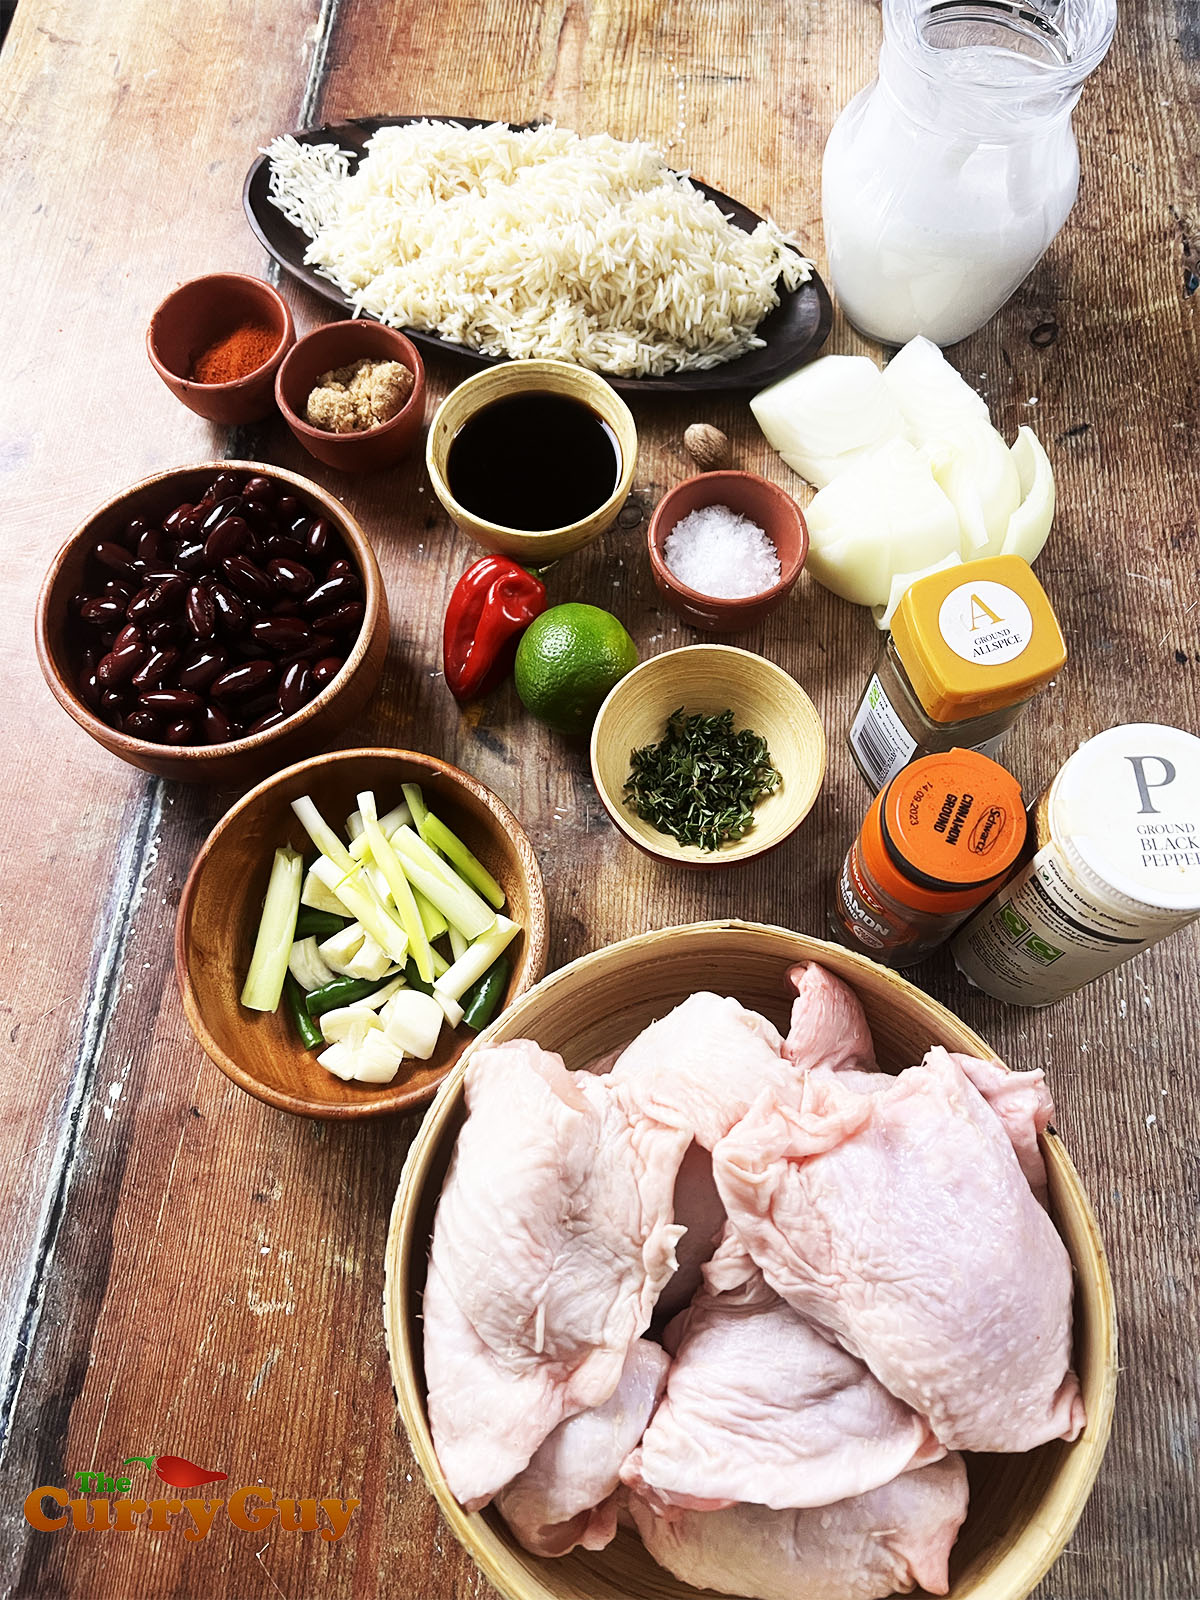 Laid out ingredients.